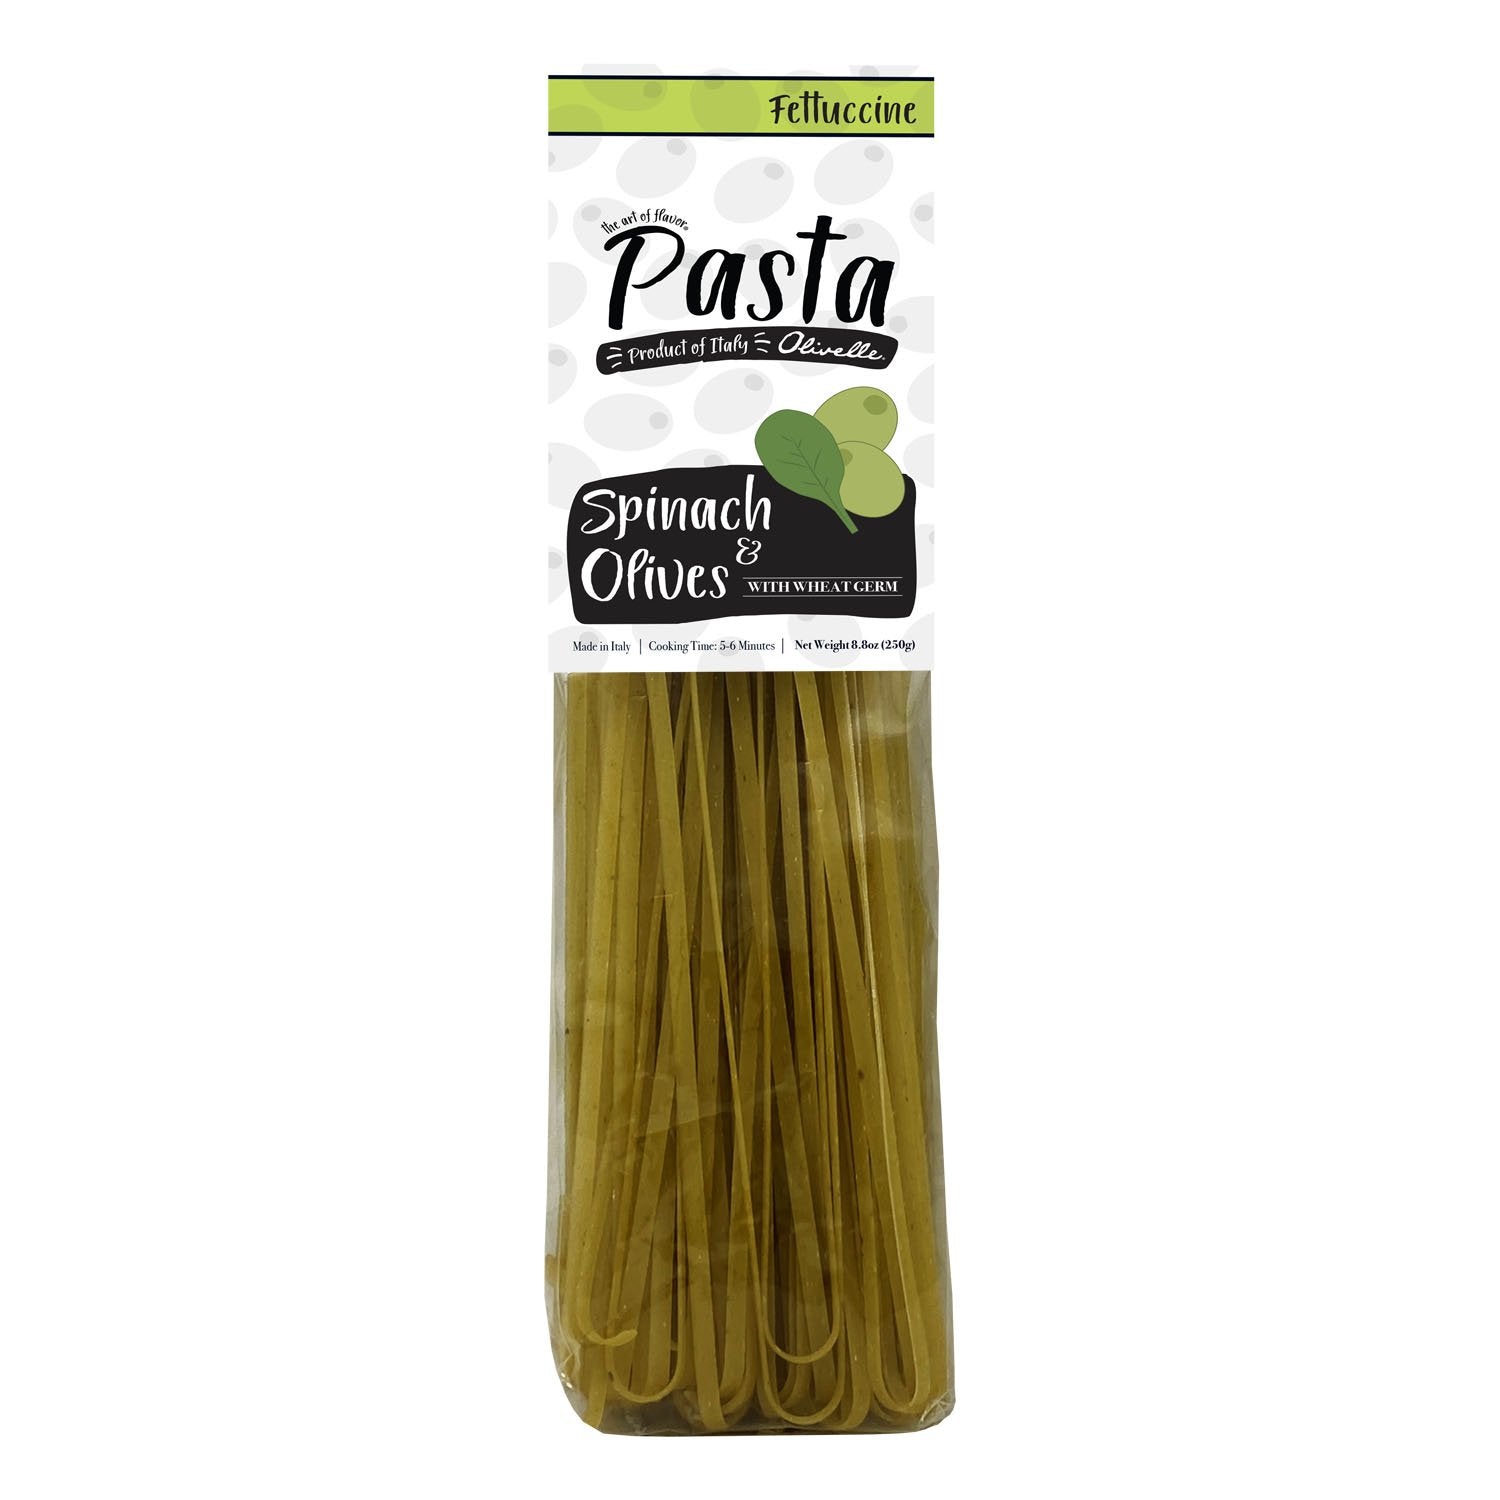 Spinach Olive Fettuccine Pasta